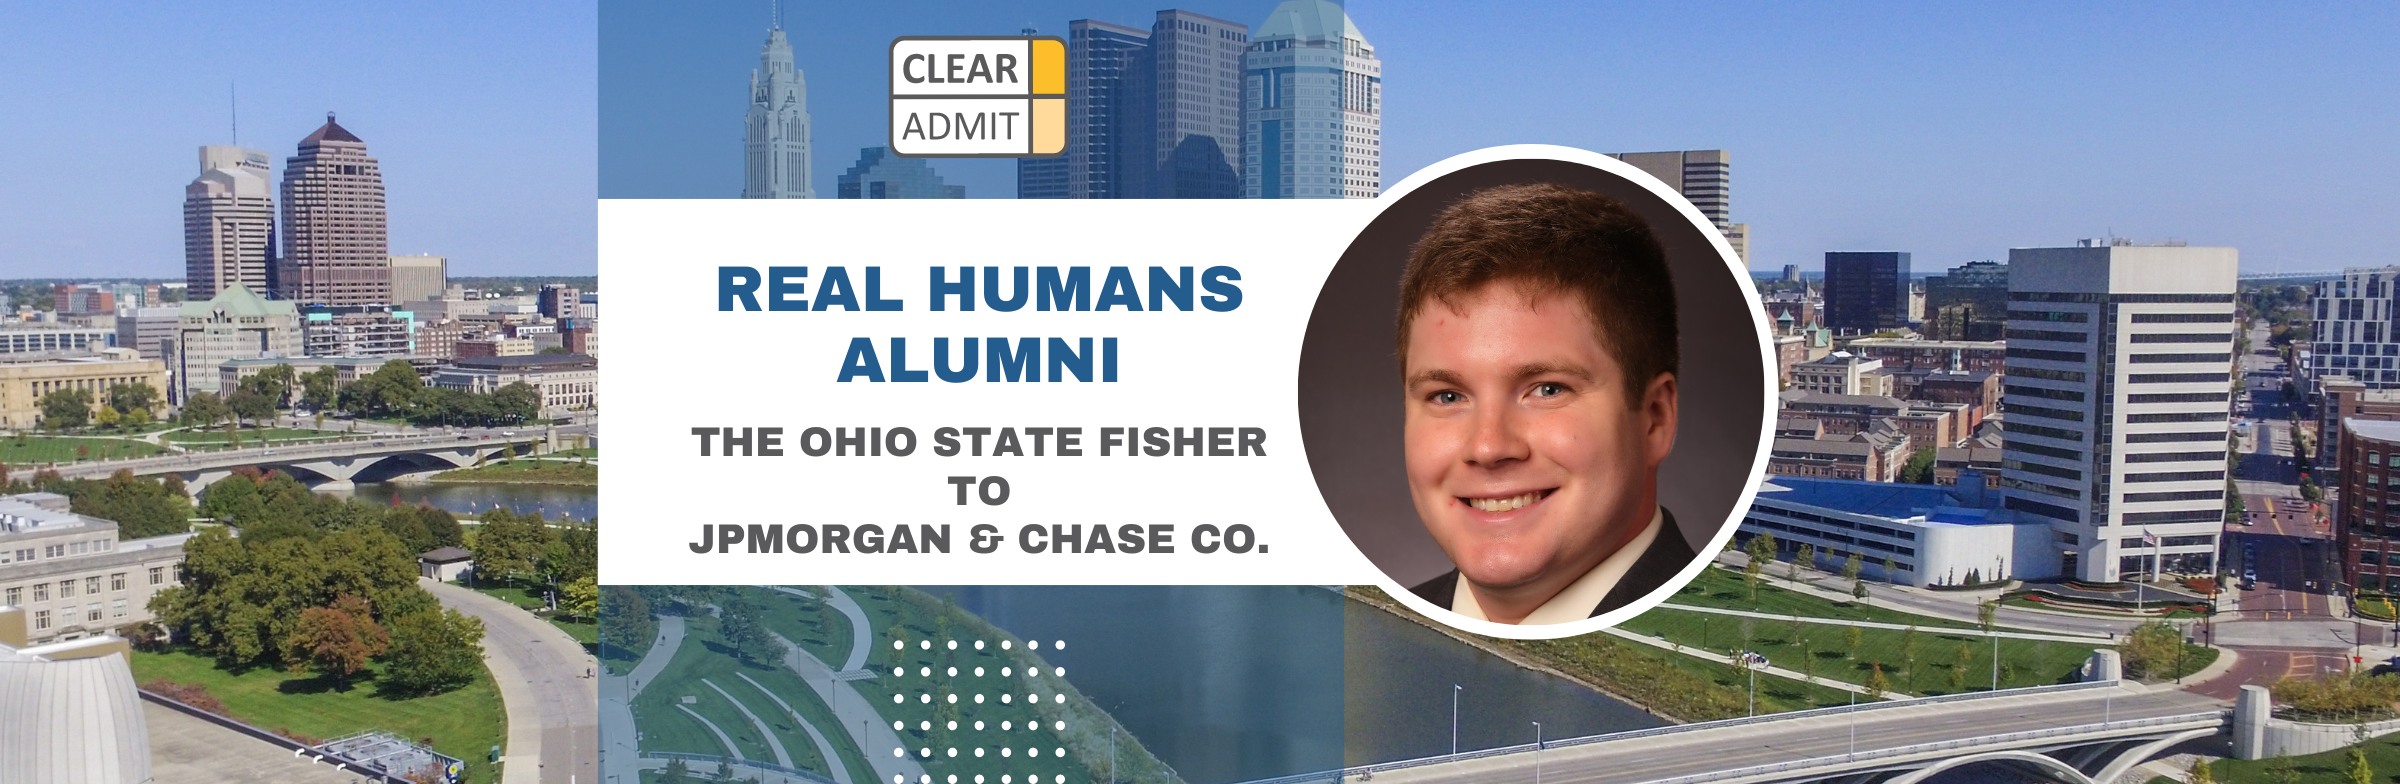 Image for Real Humans of JPMorgan Chase & Co.: Joshua Paulus, The Ohio State Fisher MBA ’23, Senior Associate